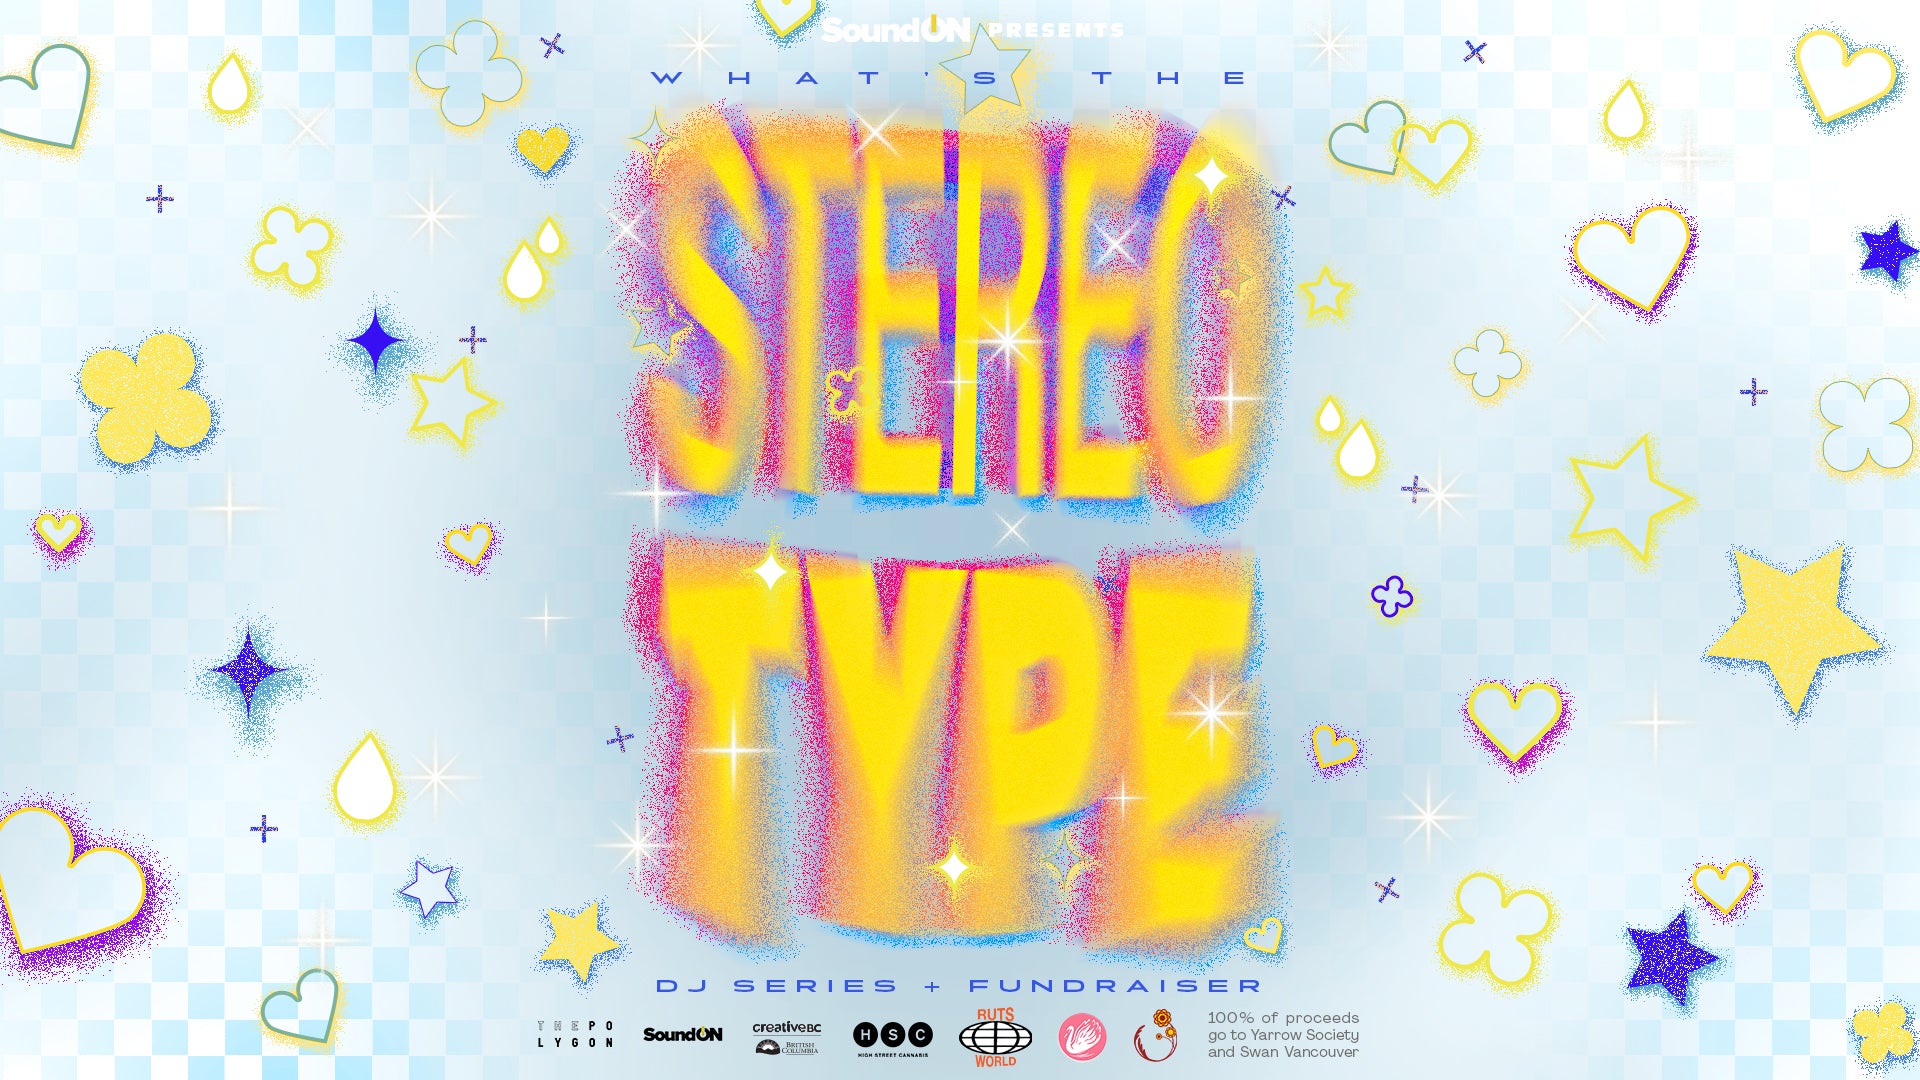 What's The Stereotype: DJ Series & Fundraiser